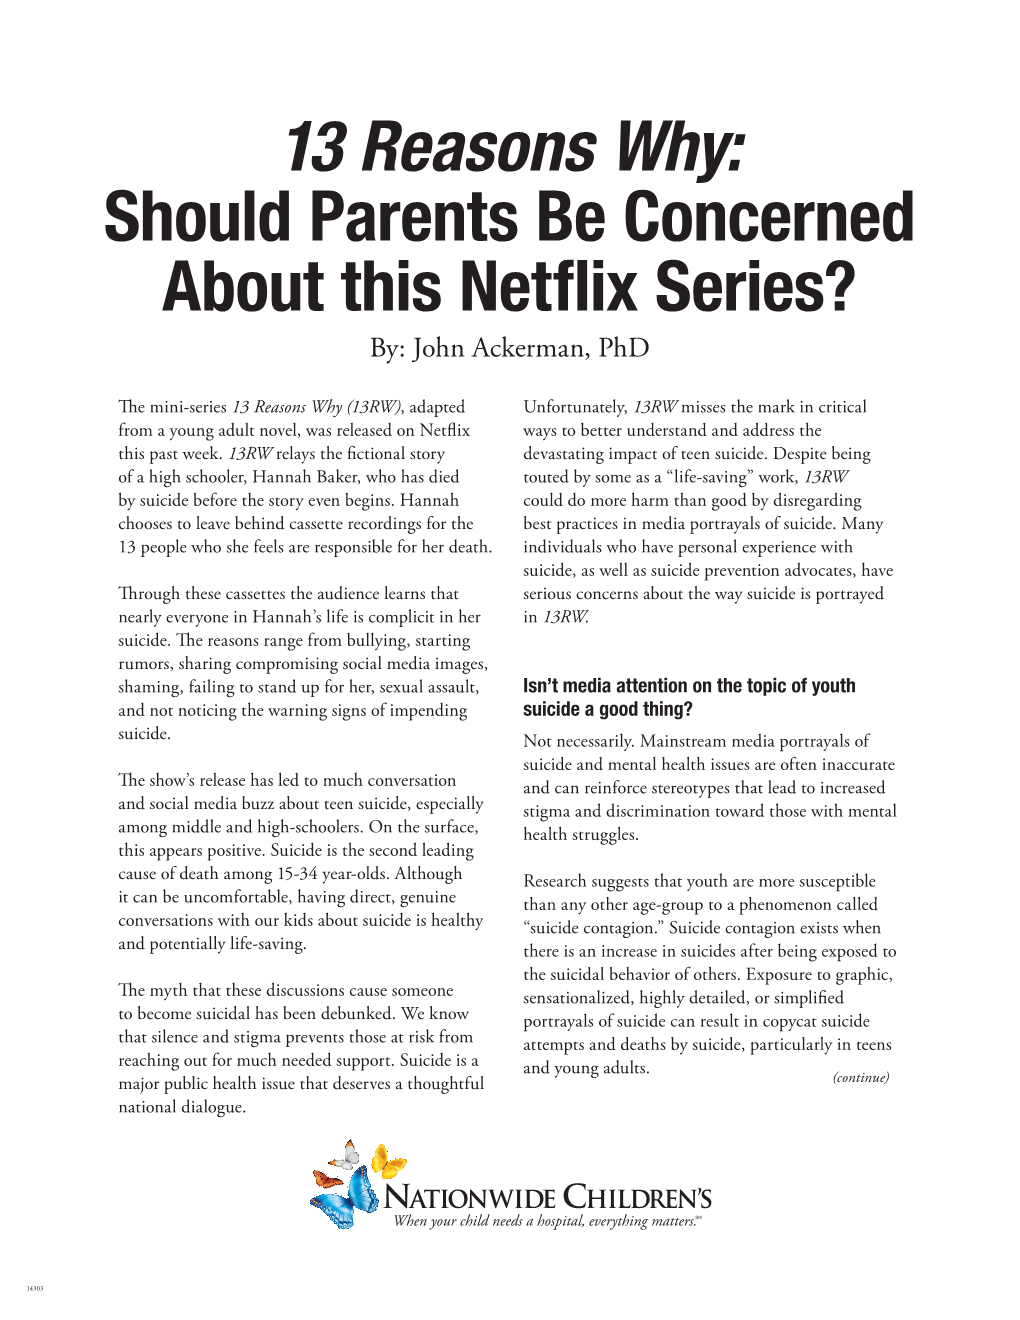 13 Reasons Why: Should Parents Be Concerned About This Netflix Series? By: John Ackerman, Phd